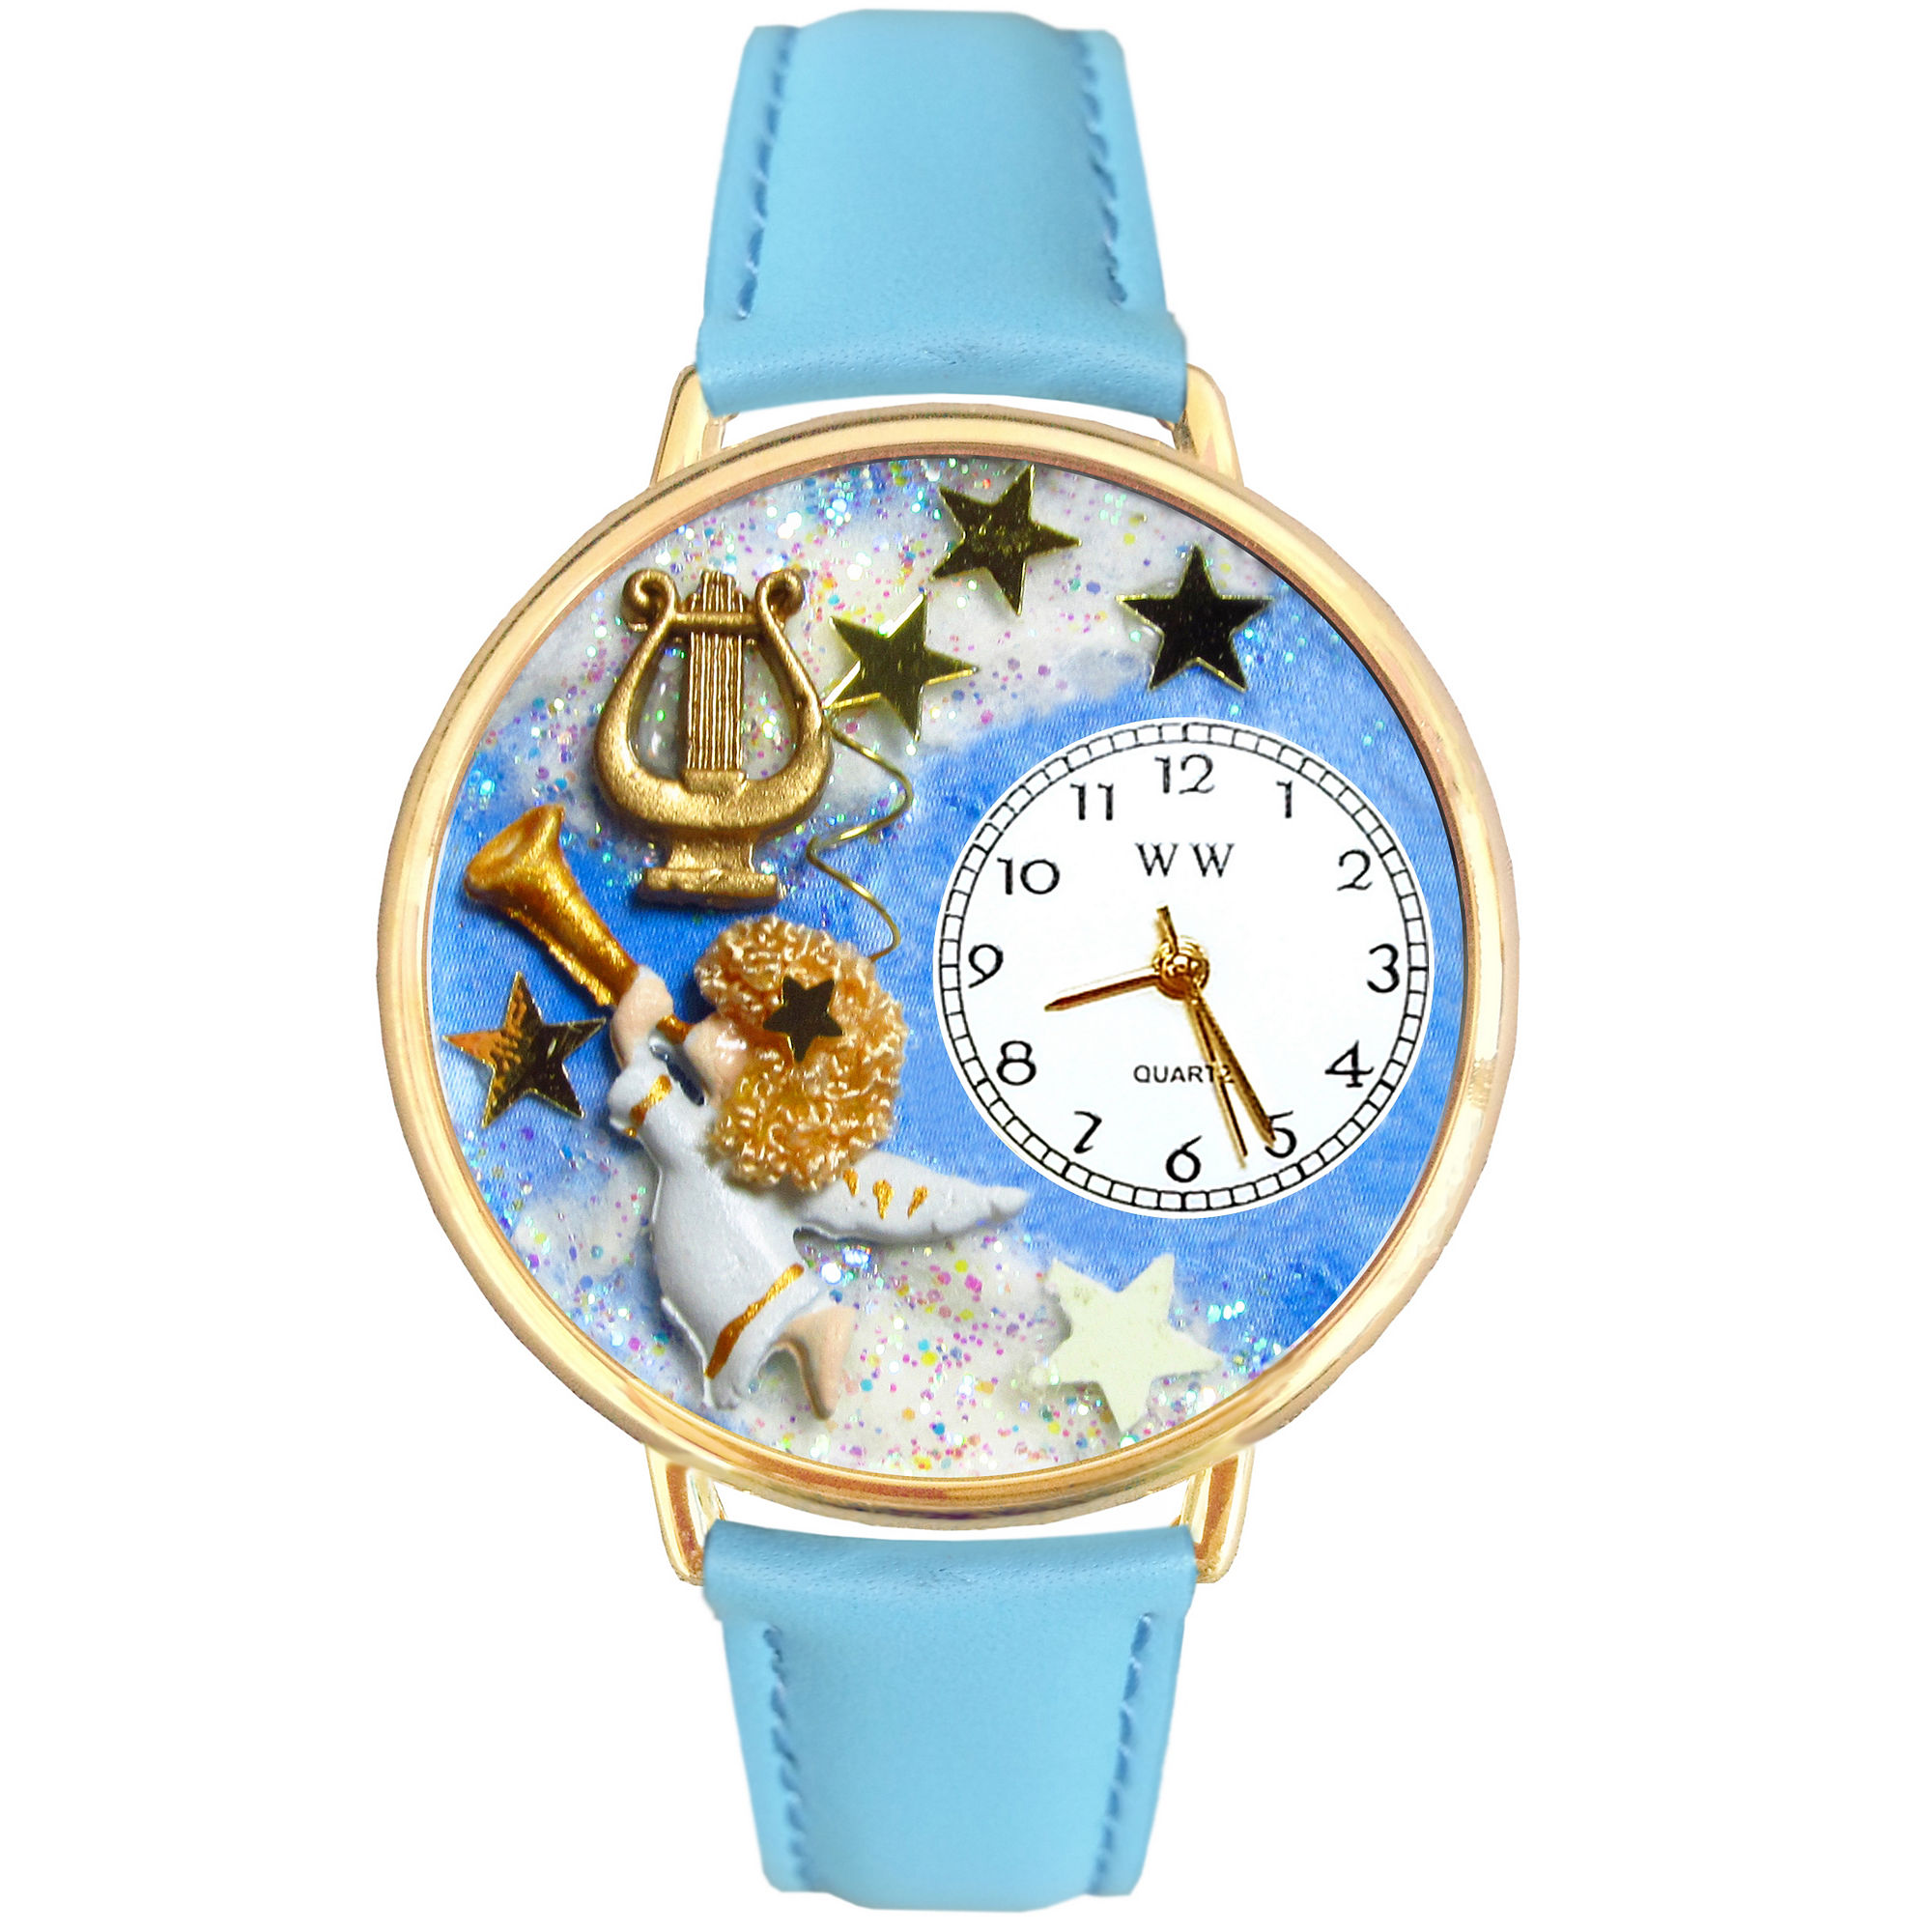 Whimsical Watches Personalized Angel Womens Gold-Tone Bezel Light Blue Leather Strap Watch